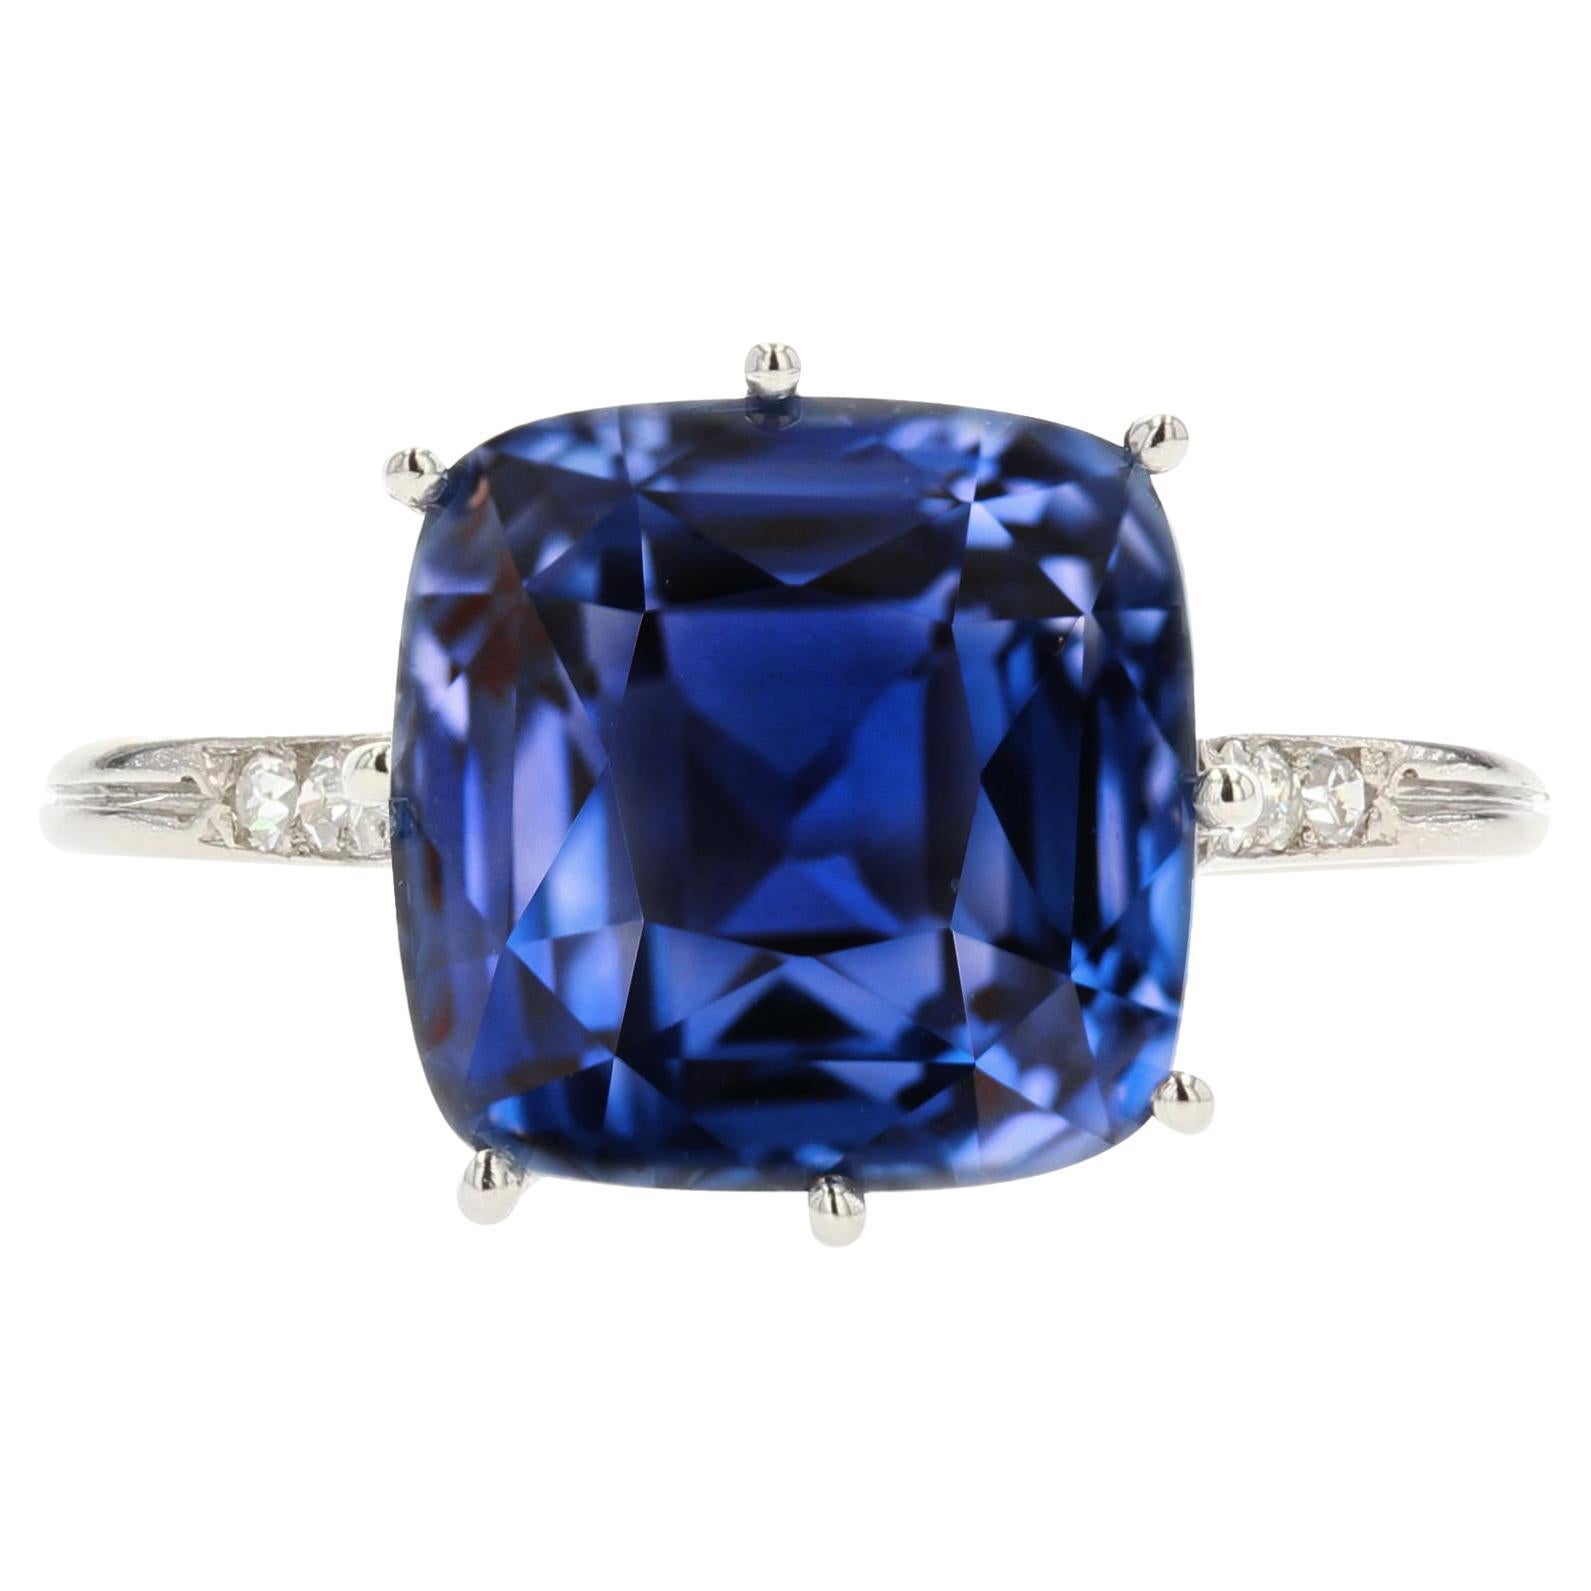 French 1930s Art Deco Natural Cornflower Certified Sapphire Diamonds Ring For Sale